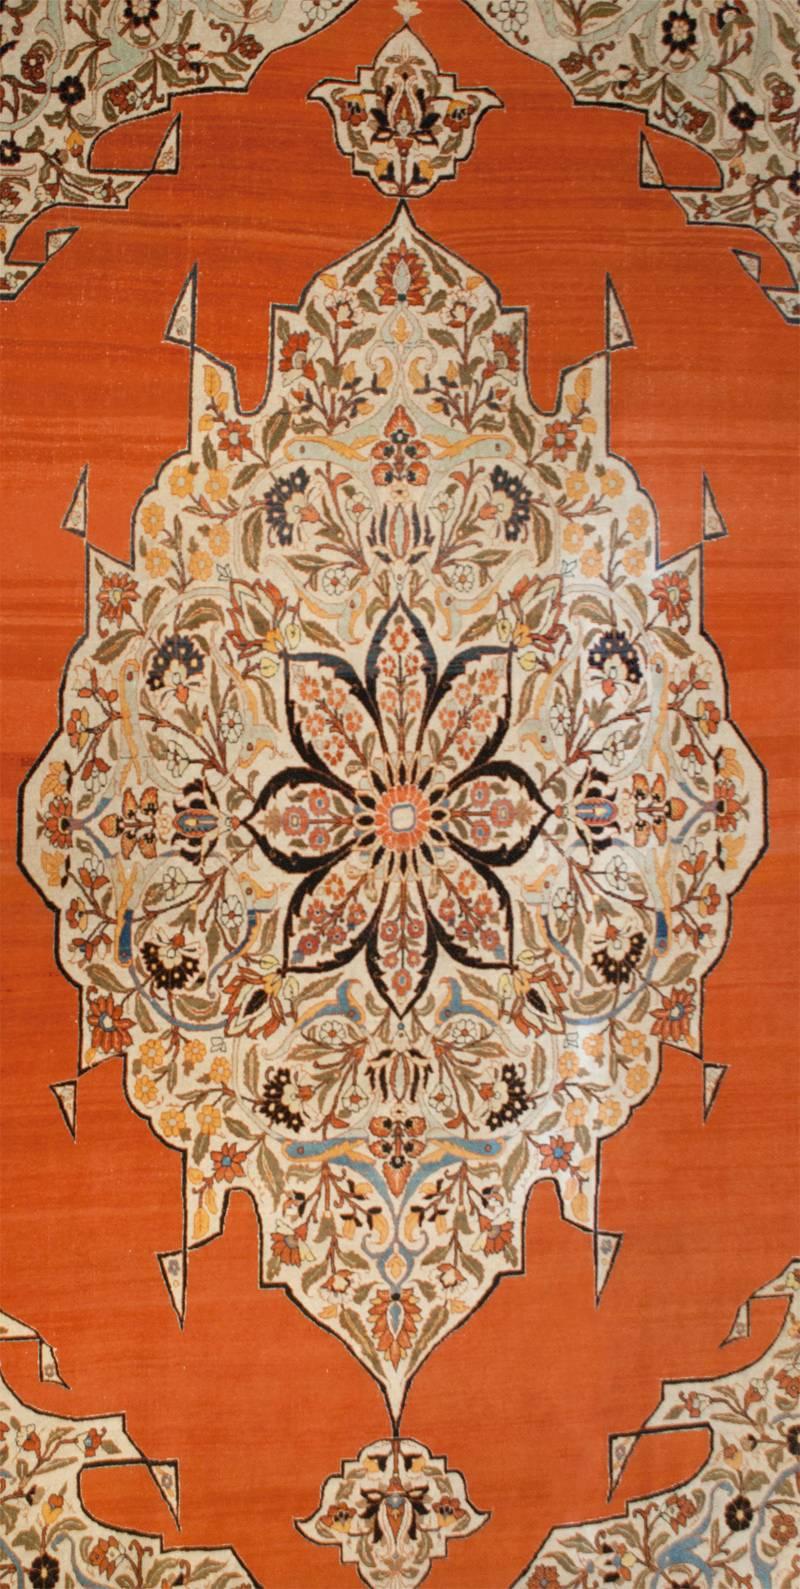 A truly masterful mid-19th century Persian Haji Jalili Tabriz rug with a unique color palette. The central medallion is skillfully rendered, almost cartoon like, with scrolling vines with myriad multicolored flowers. The medallion rests on an